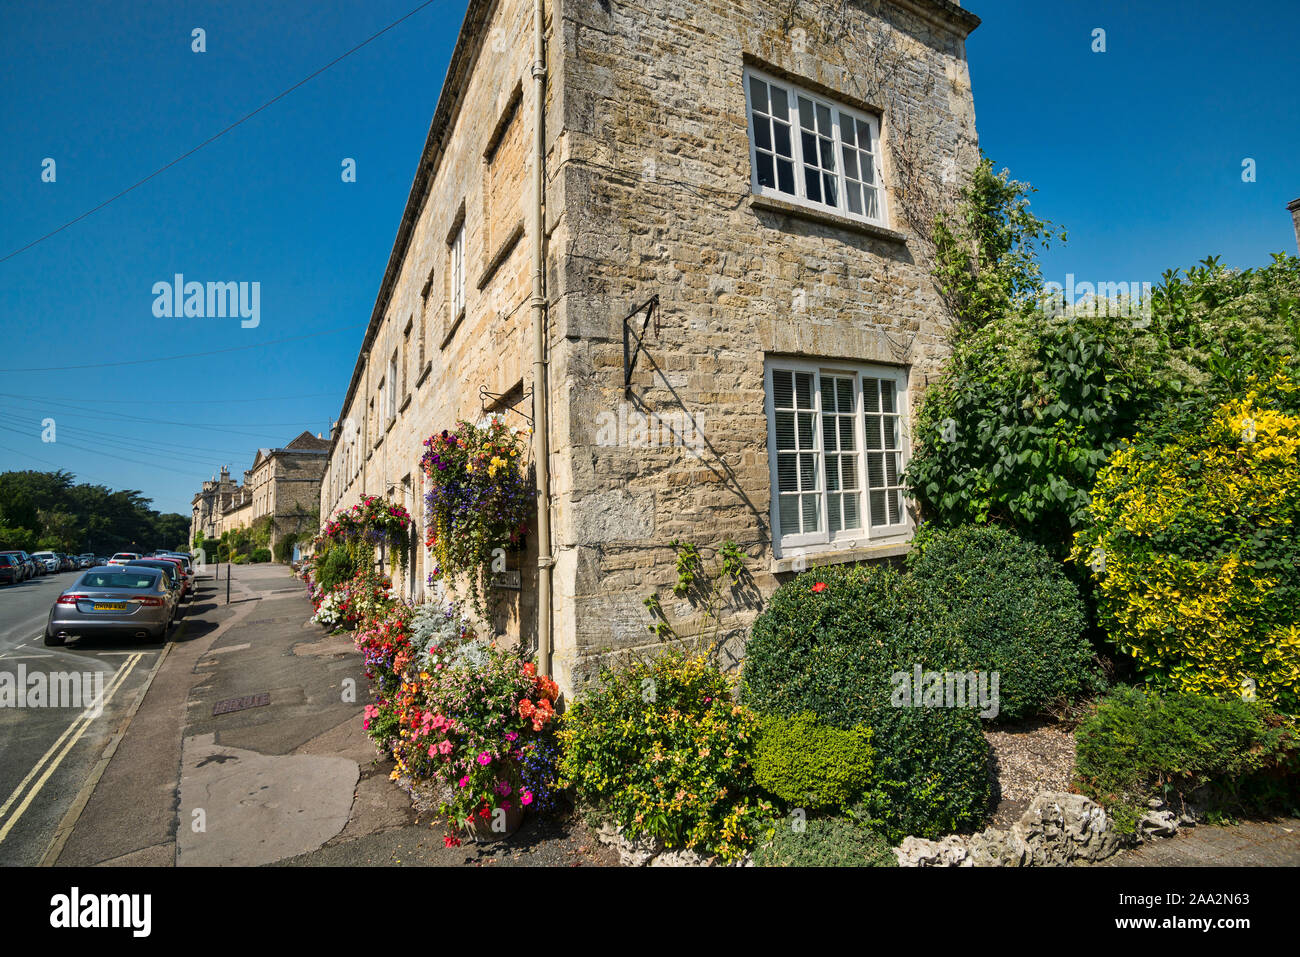 Cirencester; Cecily Hill flower display, Cotswolds, Gloucestershire; UK; England Stock Photo